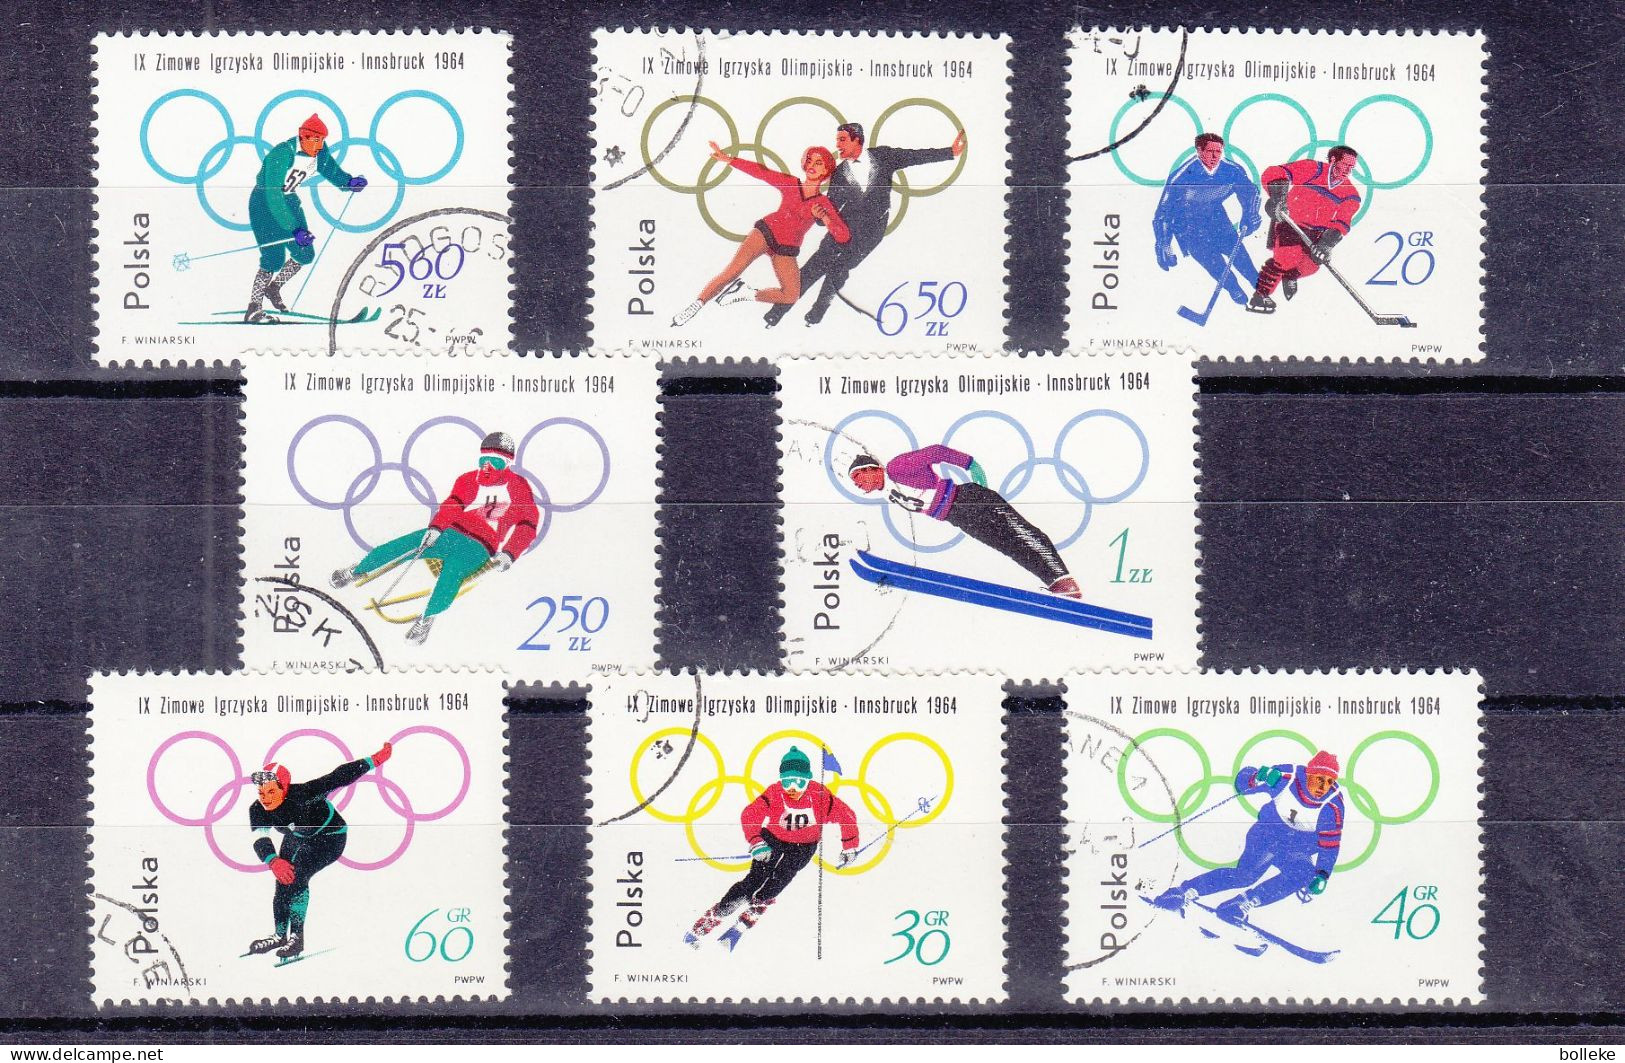 Pologne - Yvert 1322,/ 9 Oblitérés - Jeux Olympiques - Innsbruck 64 - Hockey - Ski - Patinage - - Used Stamps